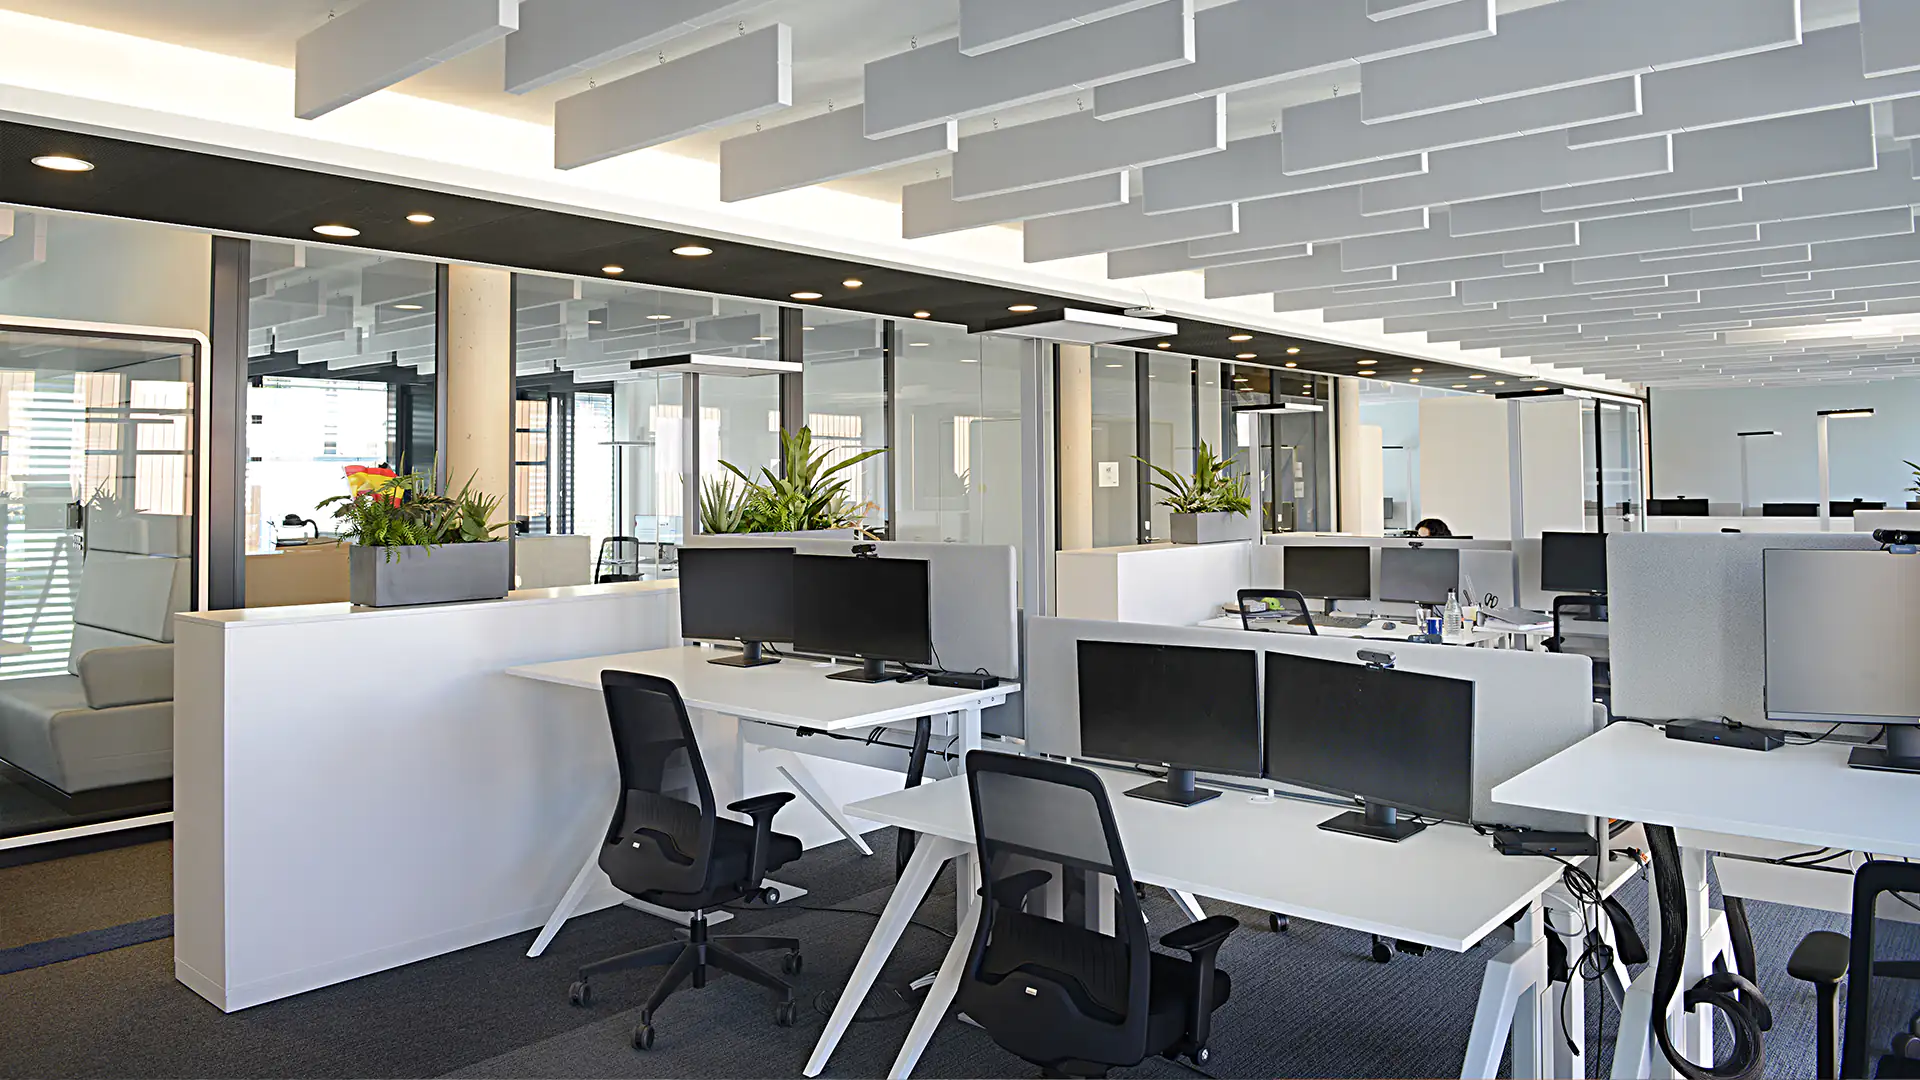 aixFOAM office - sound insulation in offices and call centers